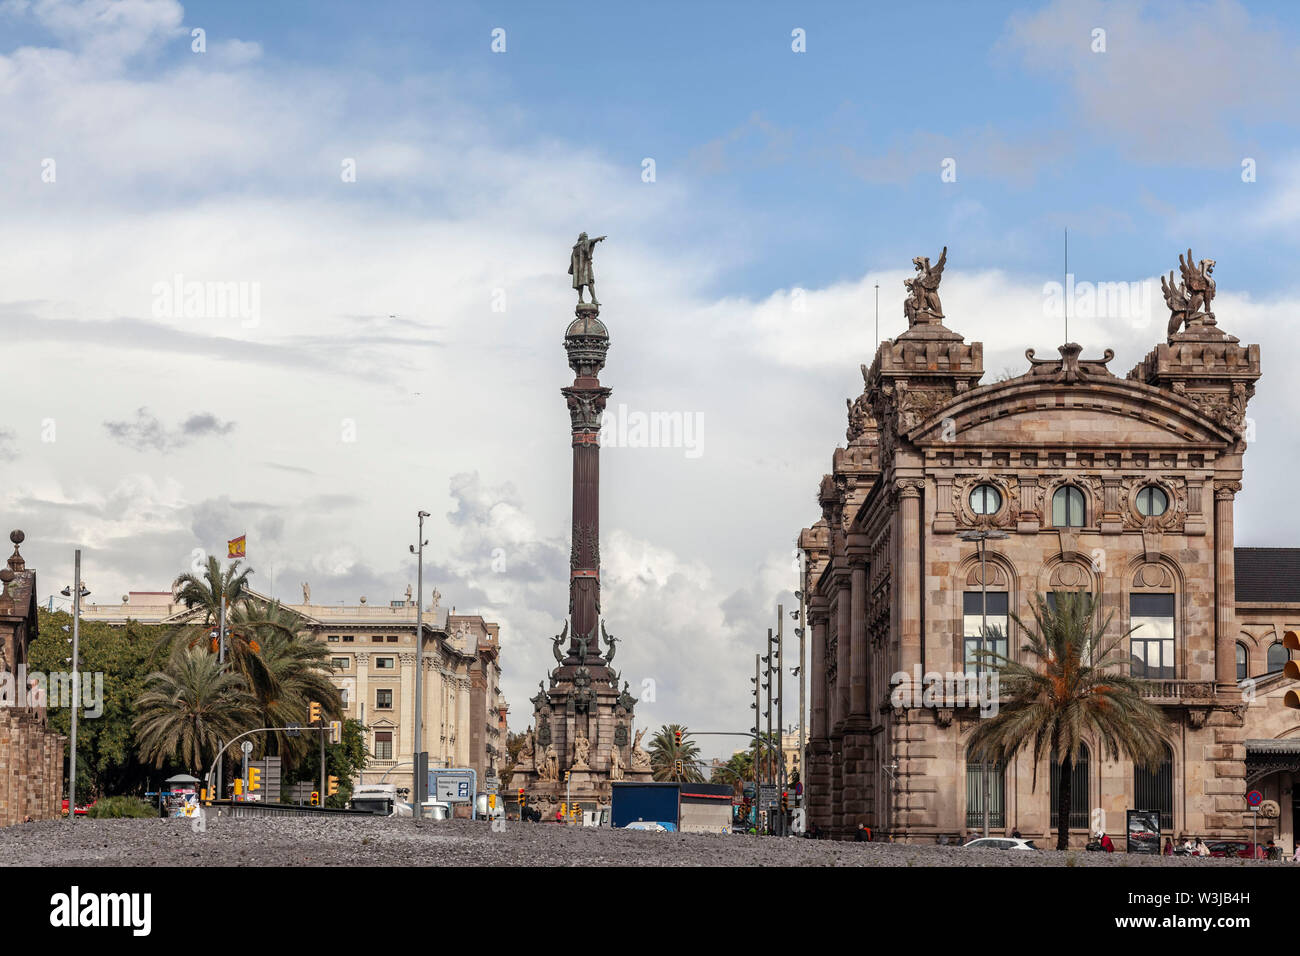 BARCELONA,SPAIN-OCTOBER 31,2019: Monument and building in Port, Columbus statue. Stock Photo